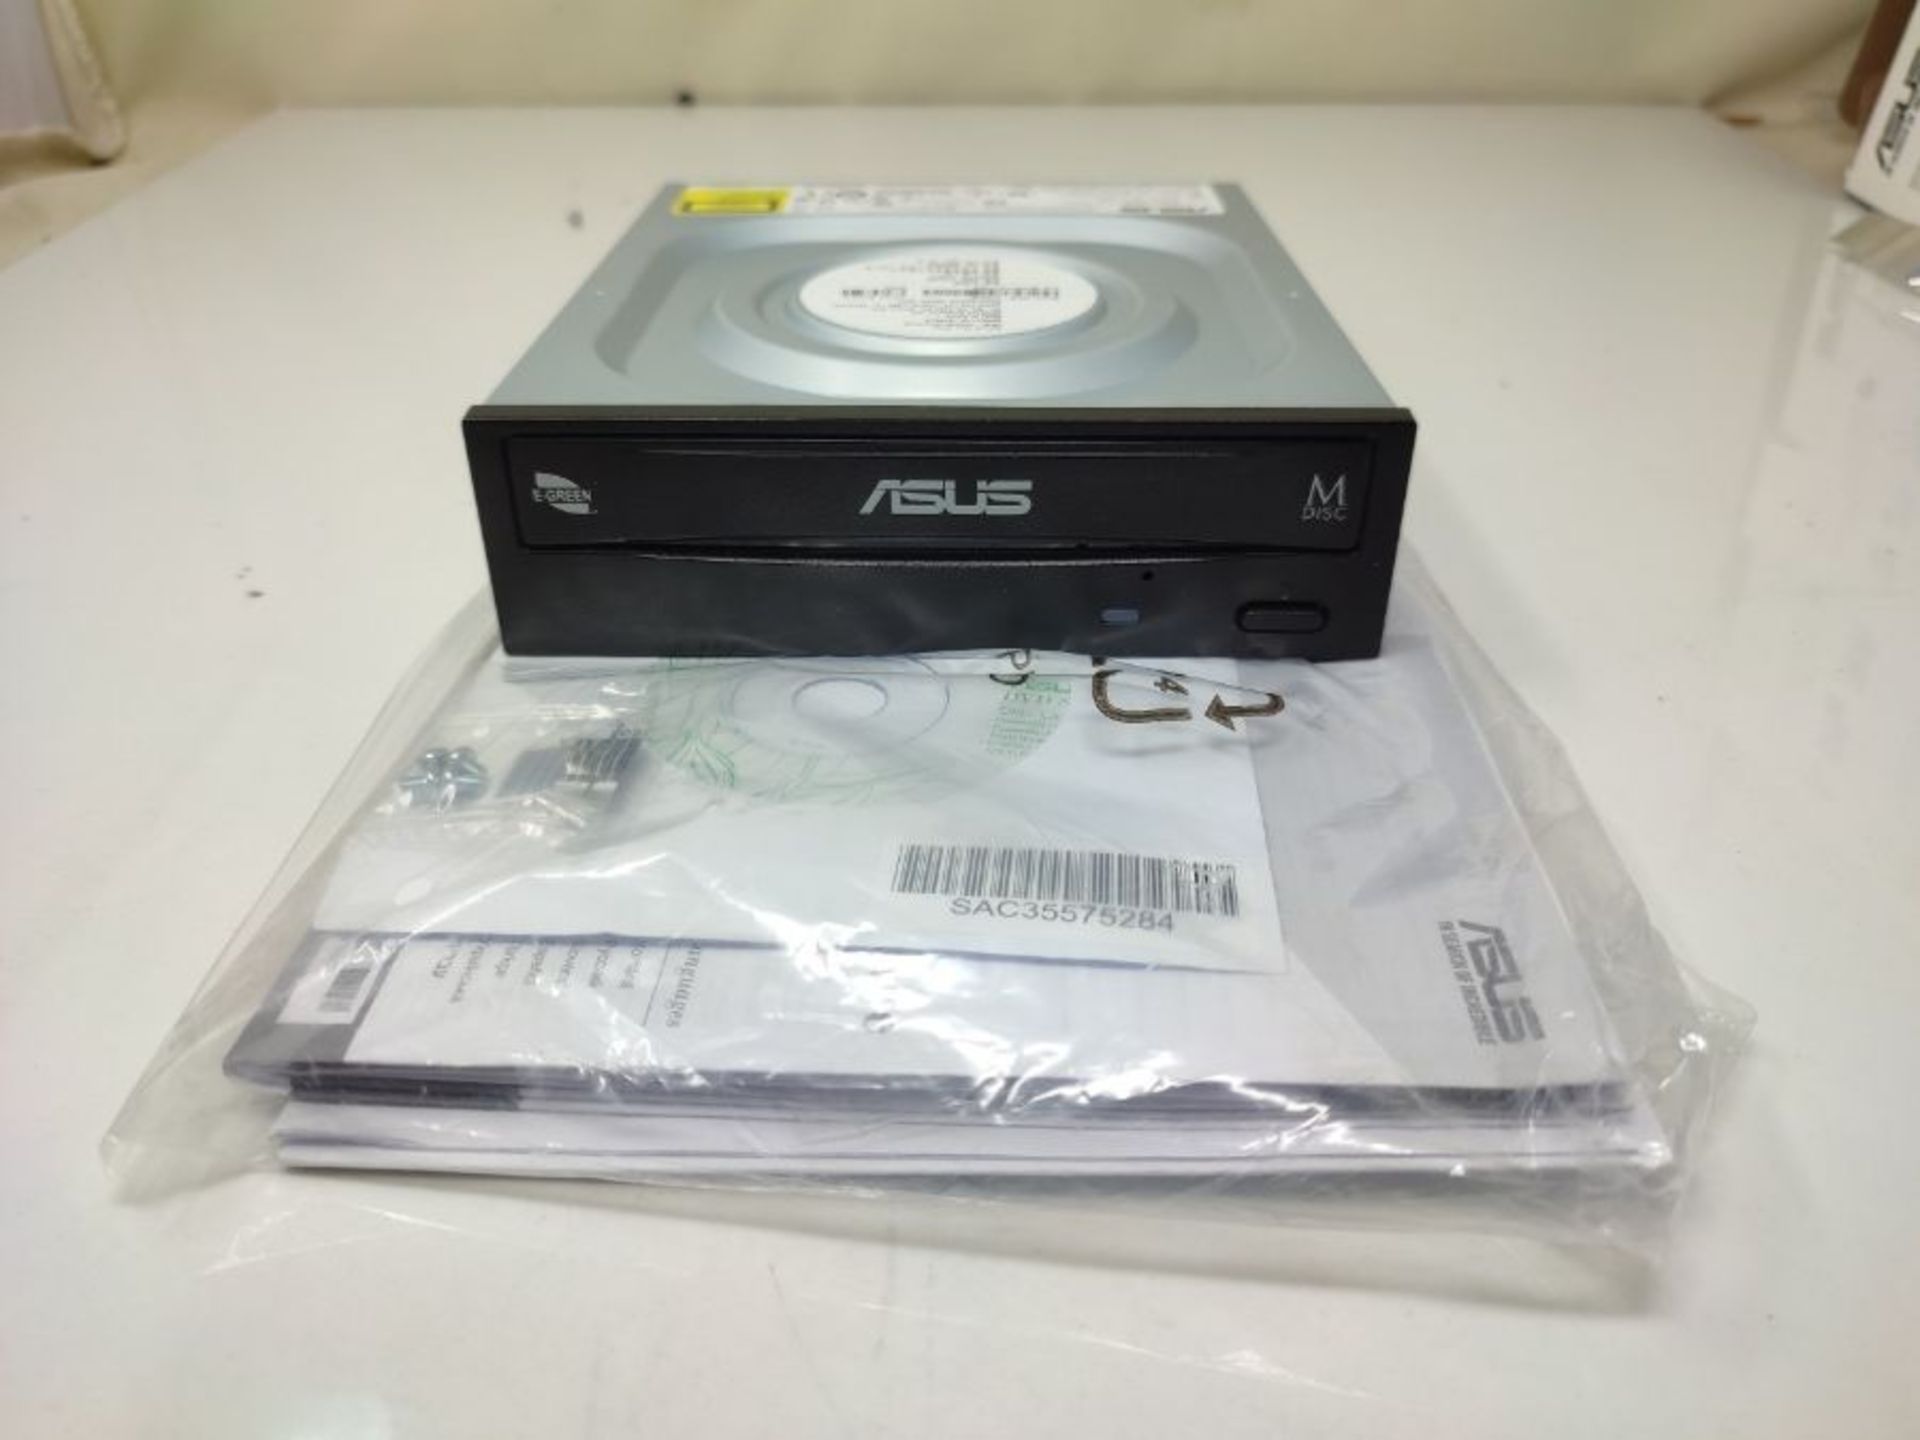 ASUS DRW-24D5MT 24X DVD writer, M-DISC support, Disc Encryption, Unlimited Webstorage( - Image 3 of 3